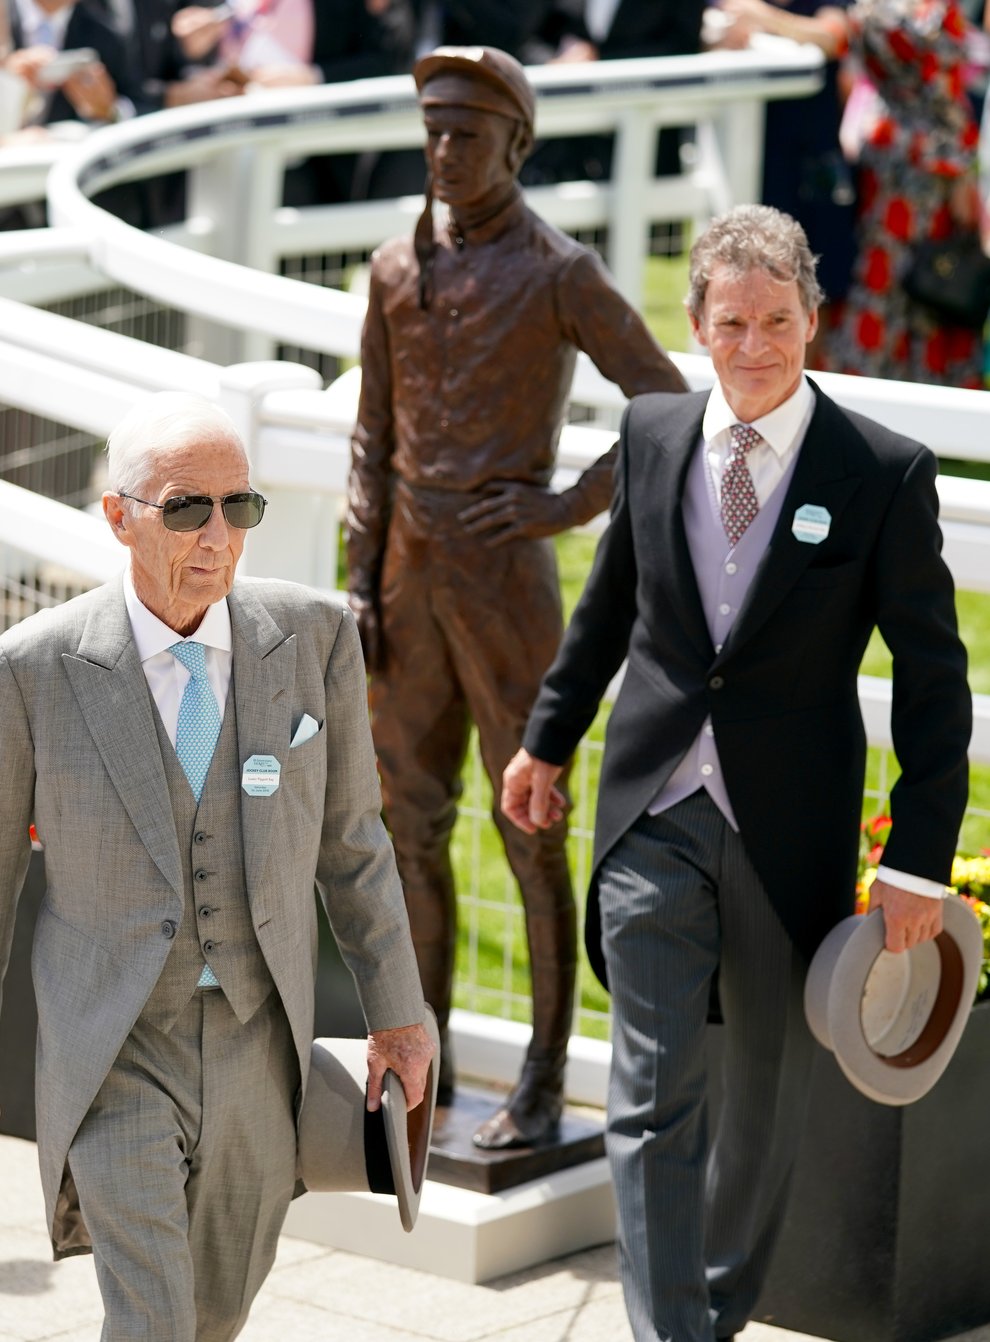 Lester Piggott (left) with his statue at Epsom on Derby Day 2019 (John Walton/PA)